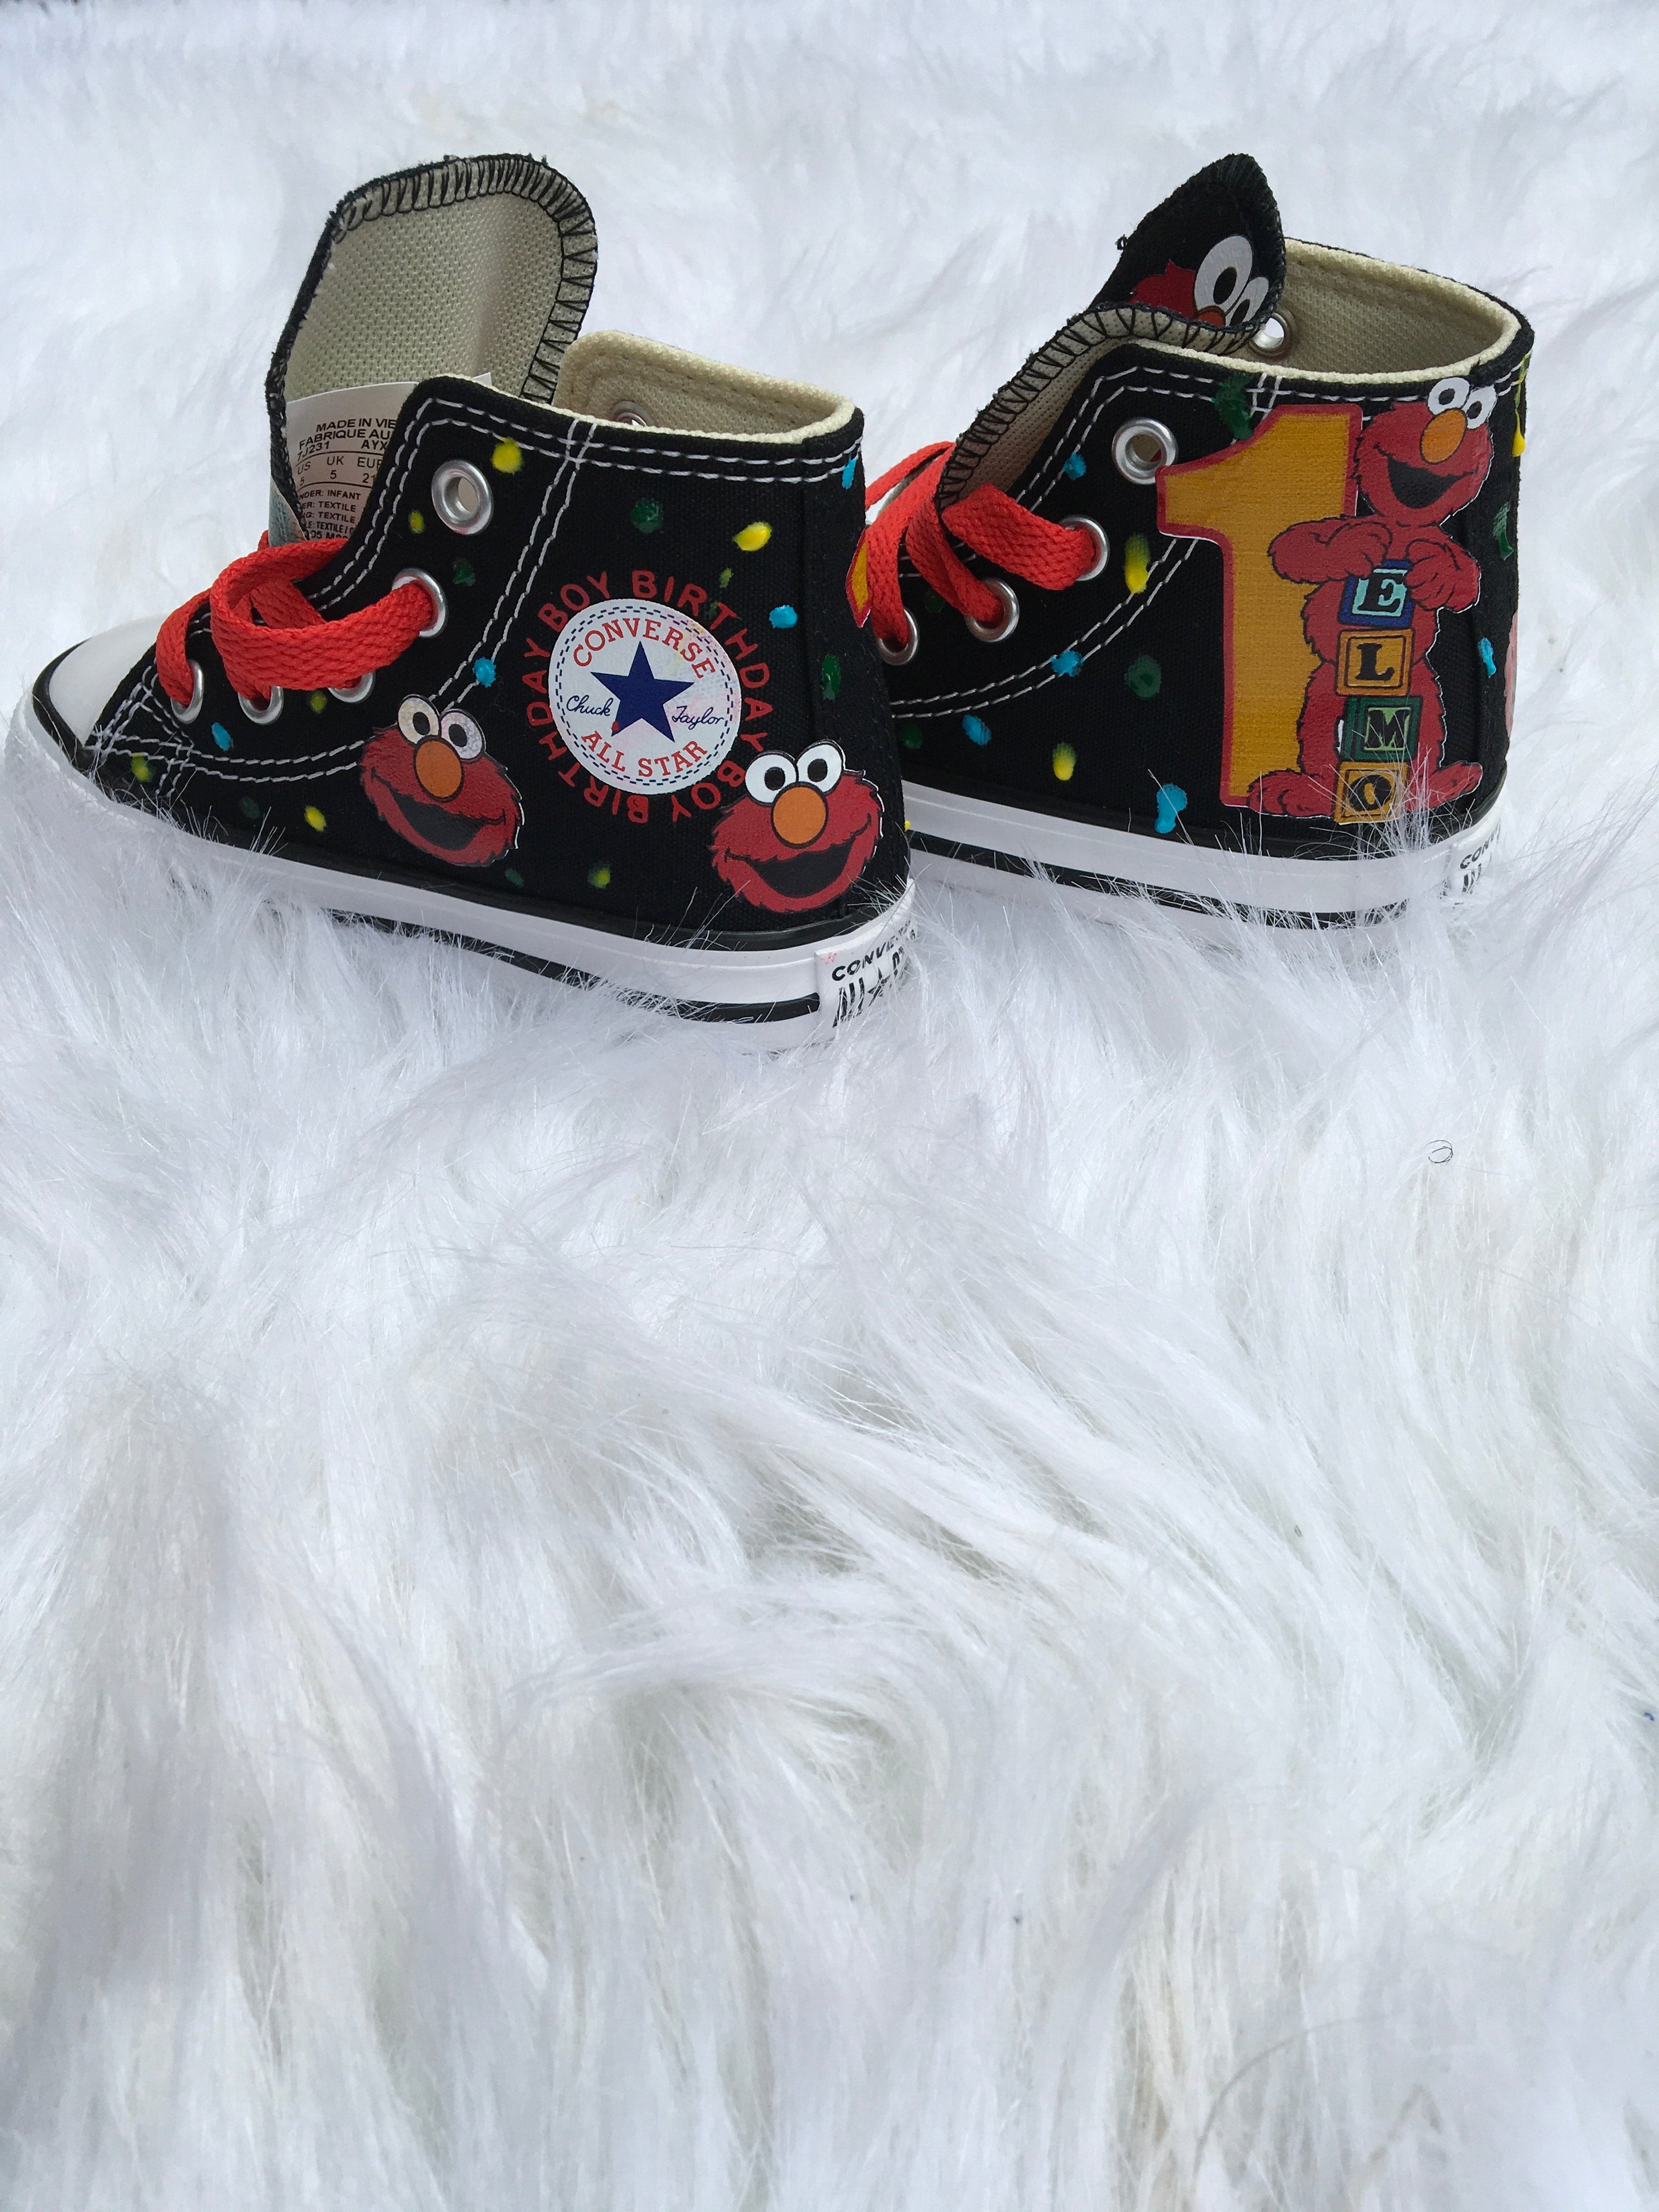 Share more than 177 custom made converse sneakers latest